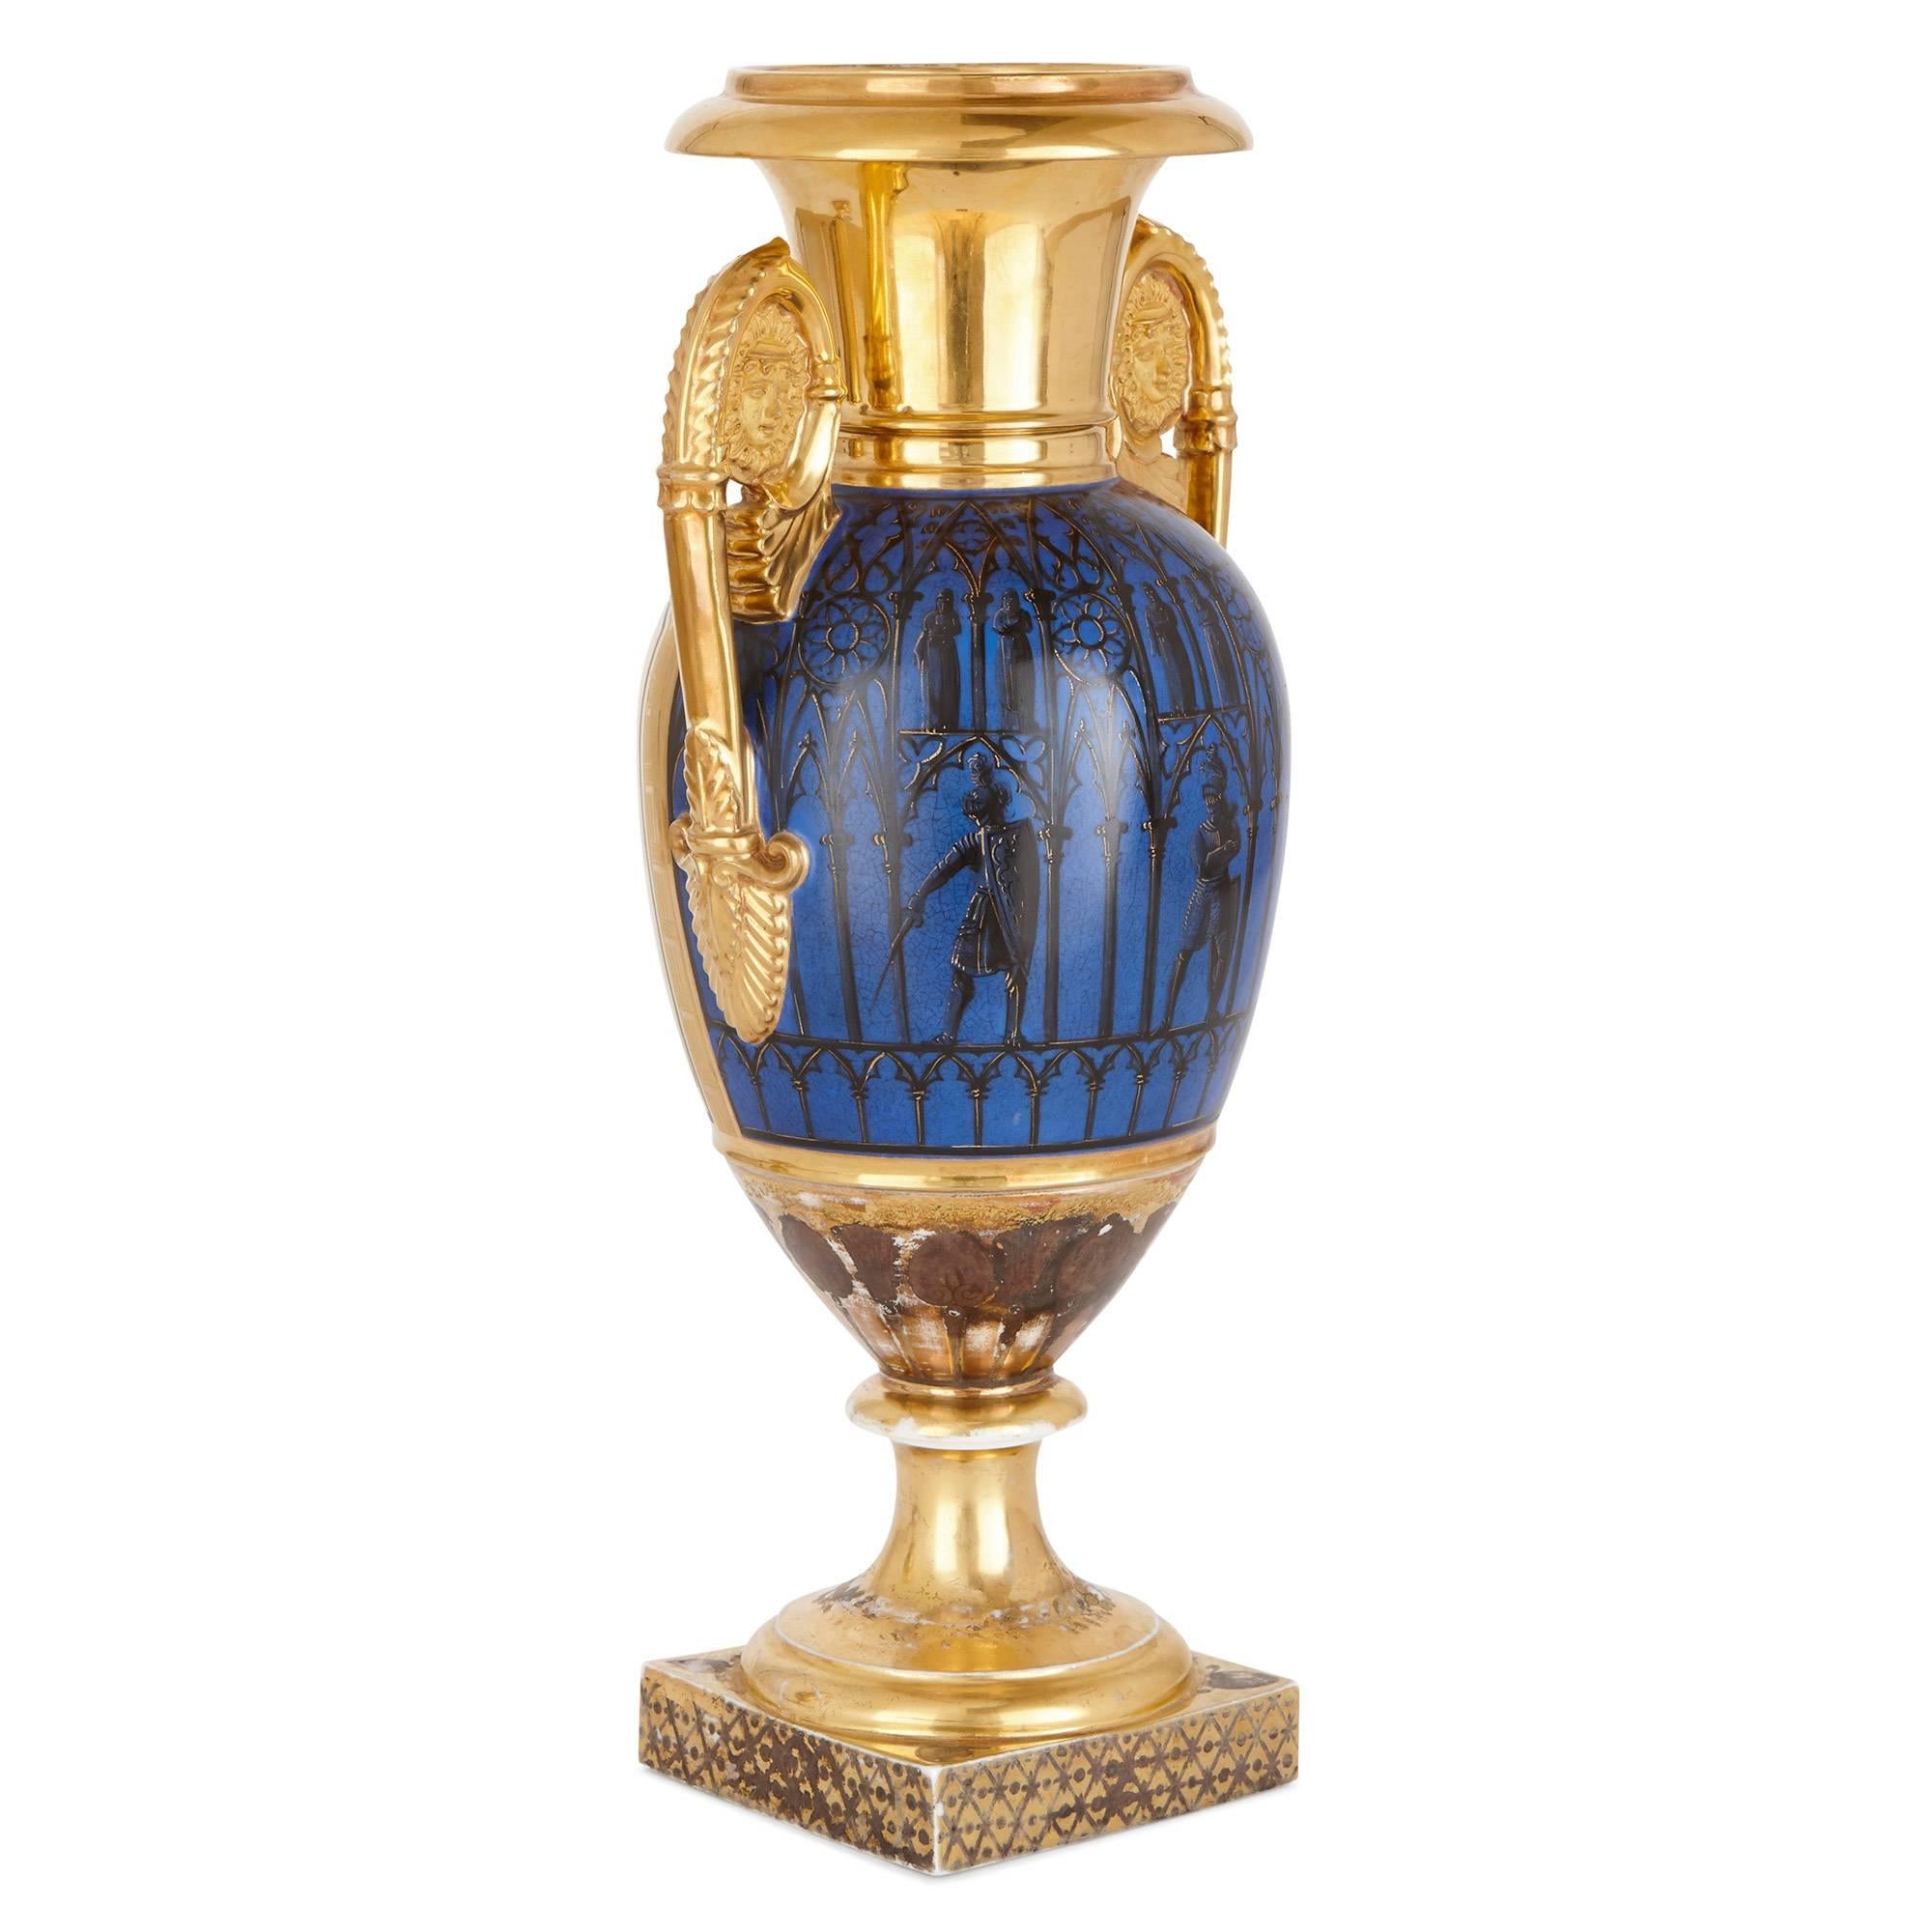 These excellent gilt ground vases are high quality antique pieces, dating from the Empire period in France at the start of the 19th century. Each vase is set on a square base, is mounted with twin scrolling handles inset with neoclassical masks, and